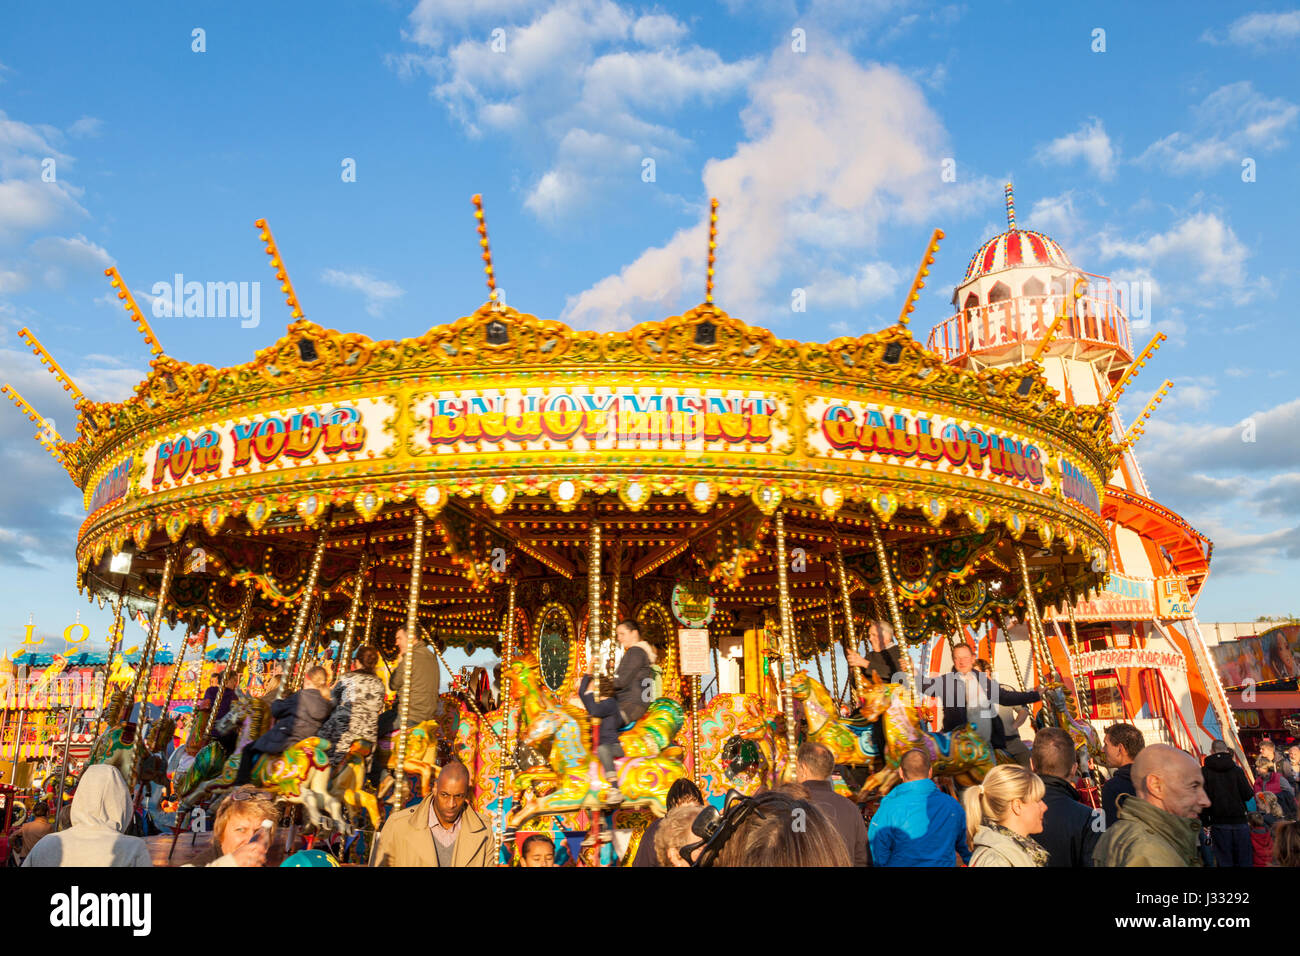 Crowds of people around a traditional fairground ride. A merry go round in evening sunshine at Goose Fair, Nottingham, England, UK Stock Photo